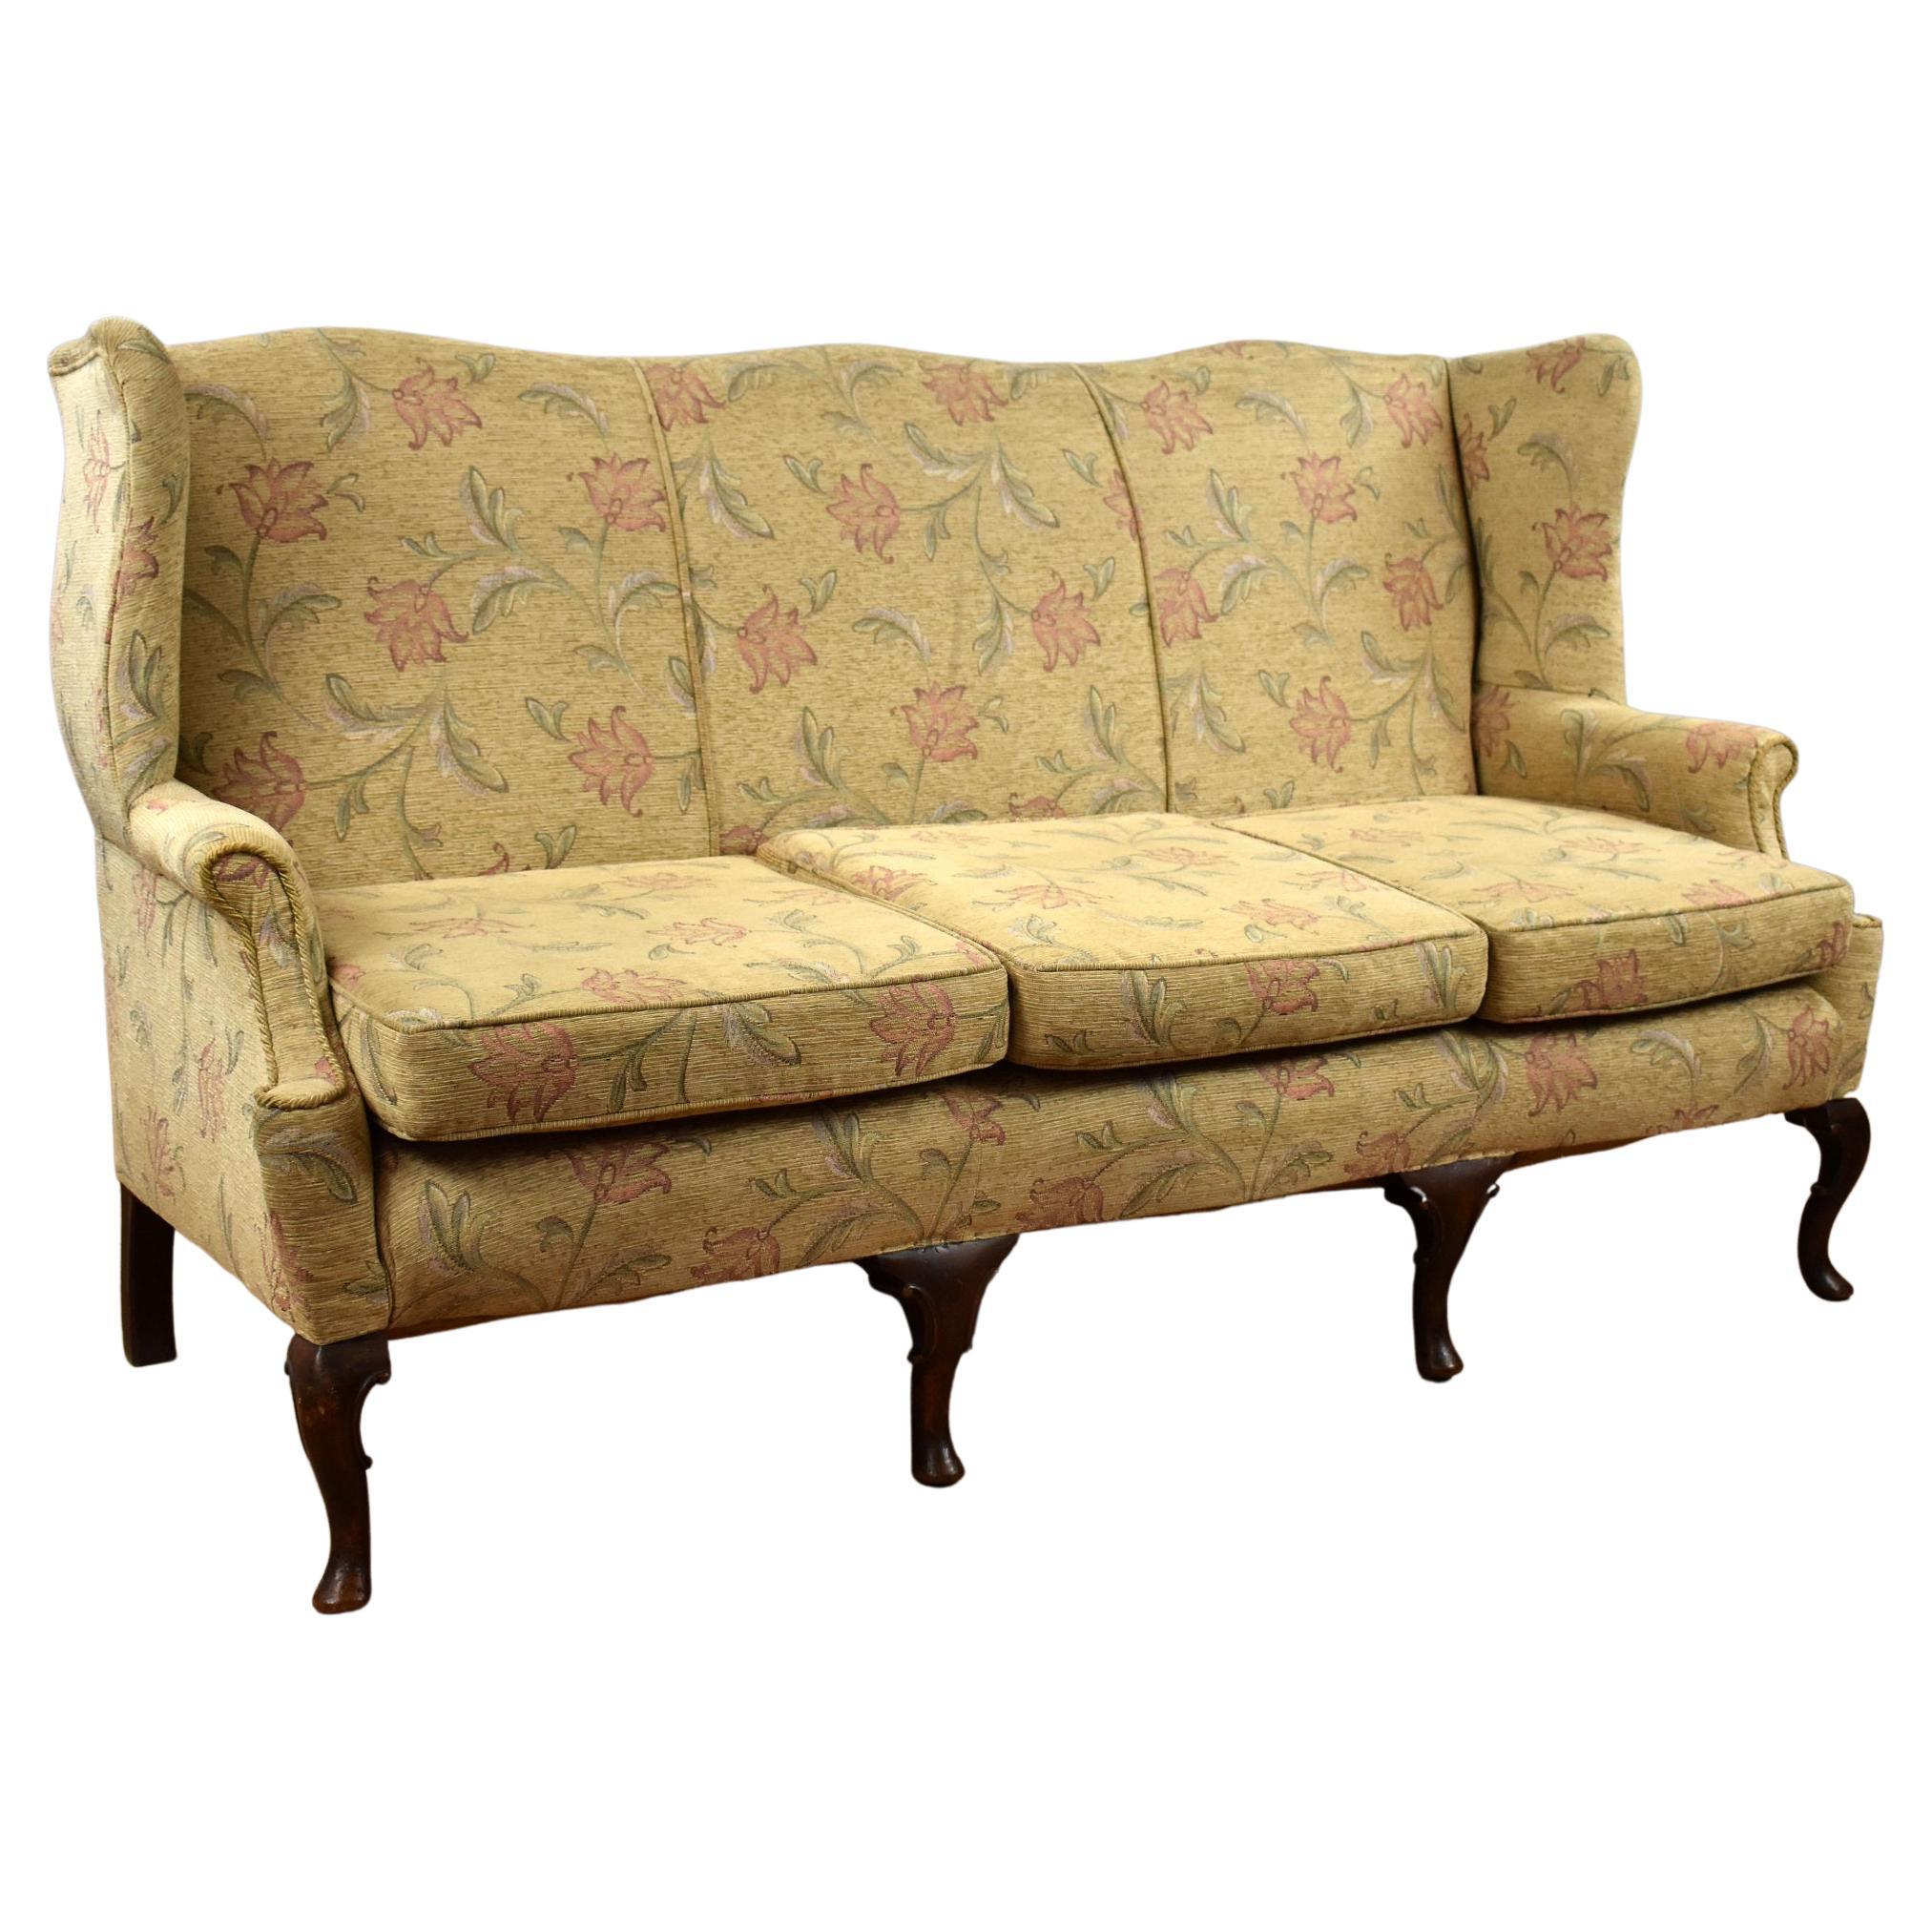 20th Century English Queen Anne Style Wing Back Sofa